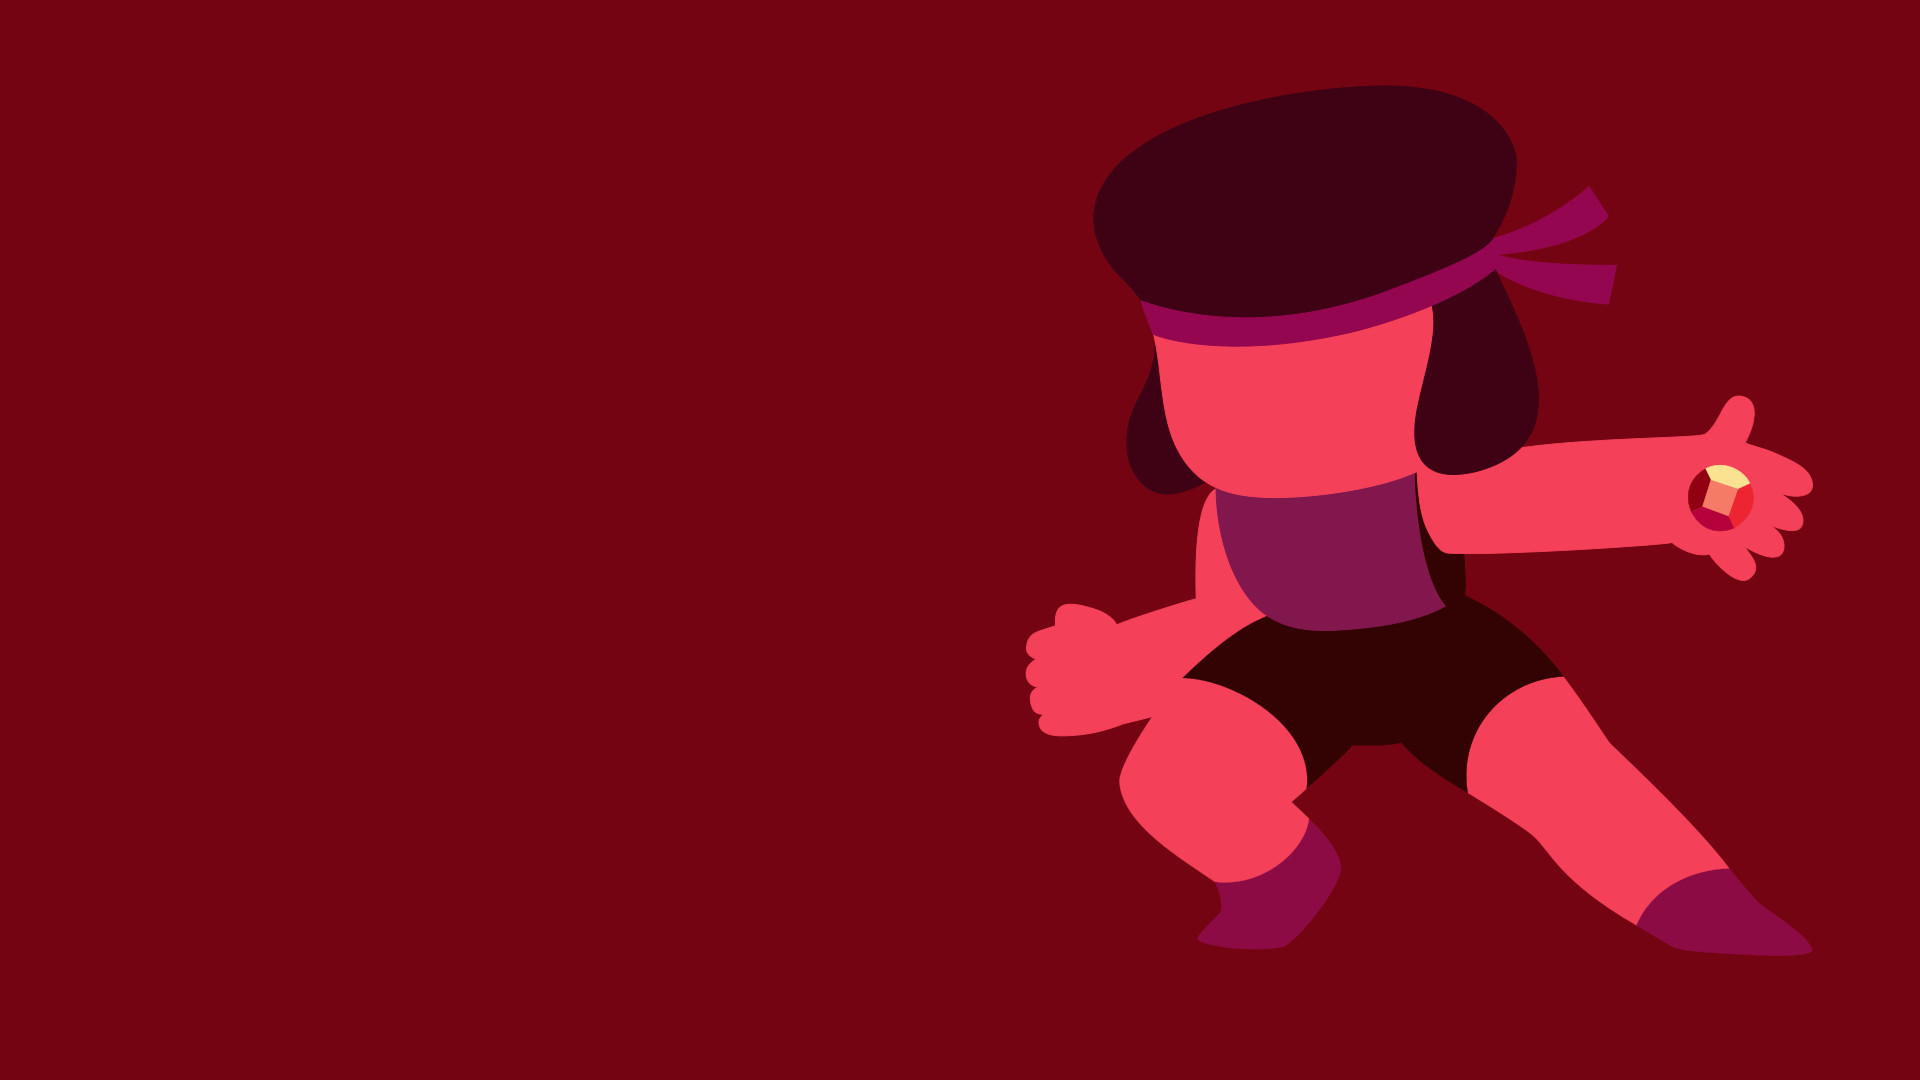 1920x1080 Ruby vector wallpaper by CaptainBeans Ruby vector wallpaper by CaptainBeans